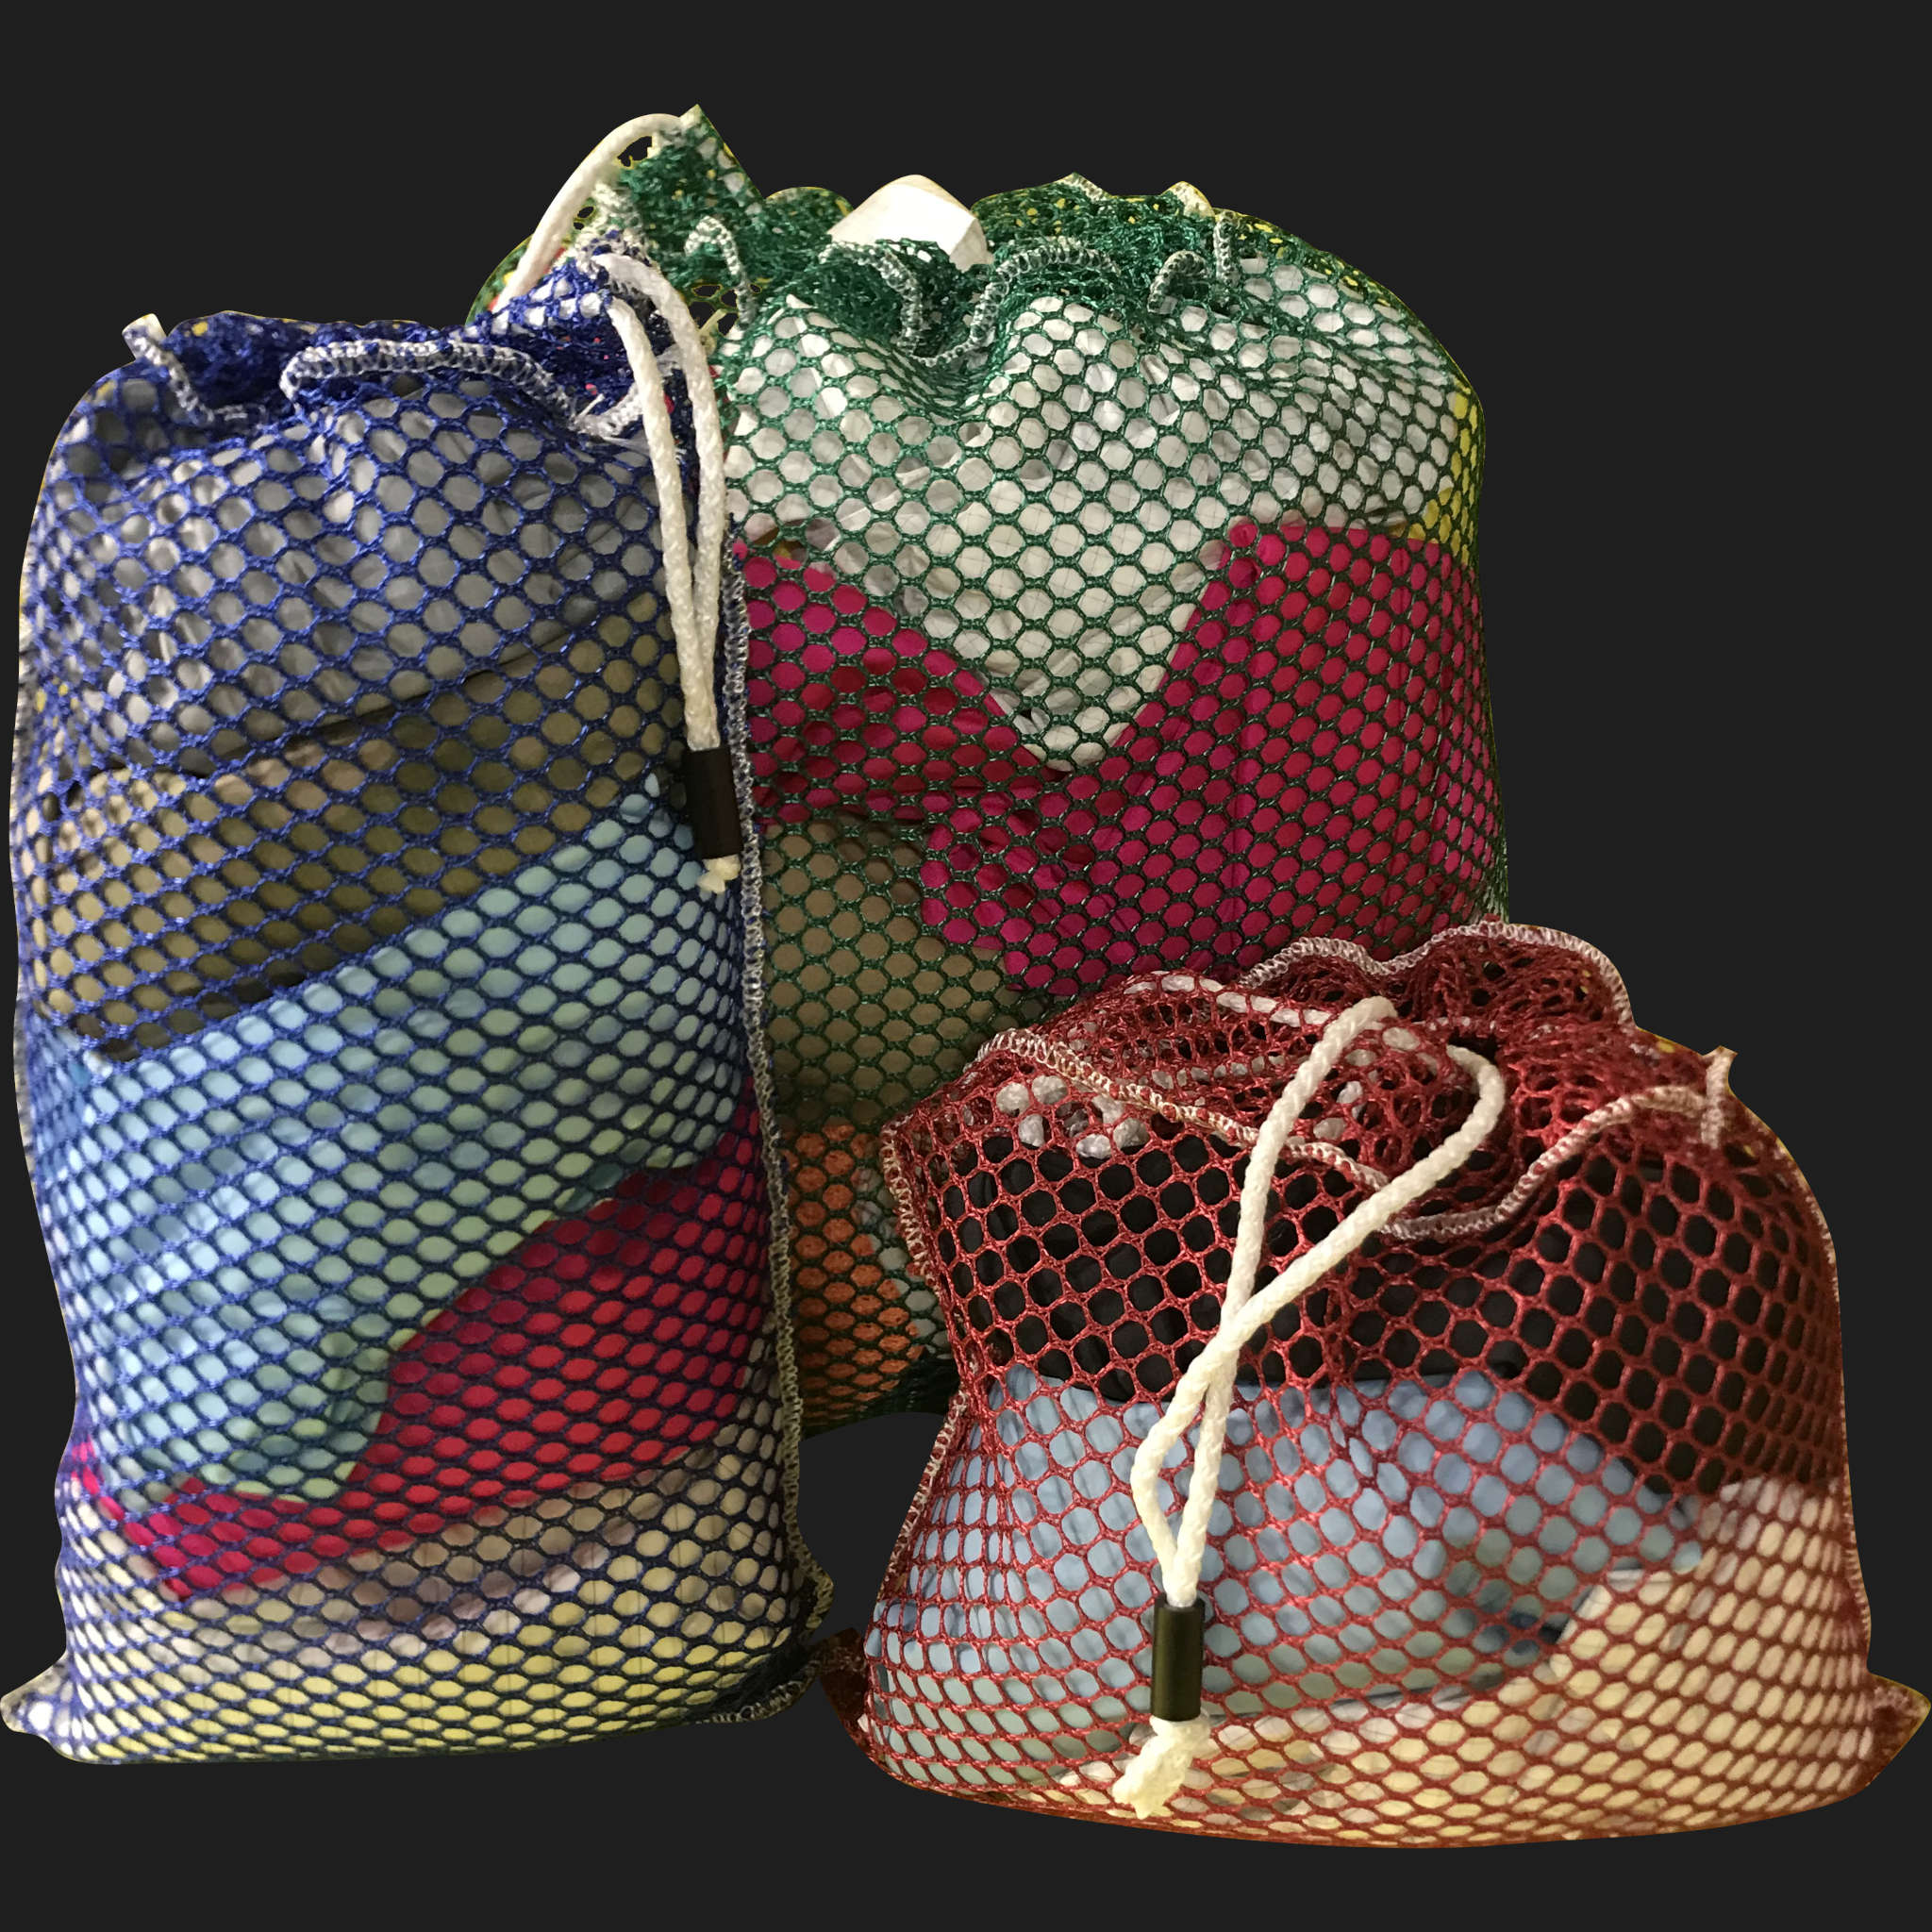 46" x 52" Customized Mesh-Net-Laundry Bags Heavy Duty with Cord and barrellock closure